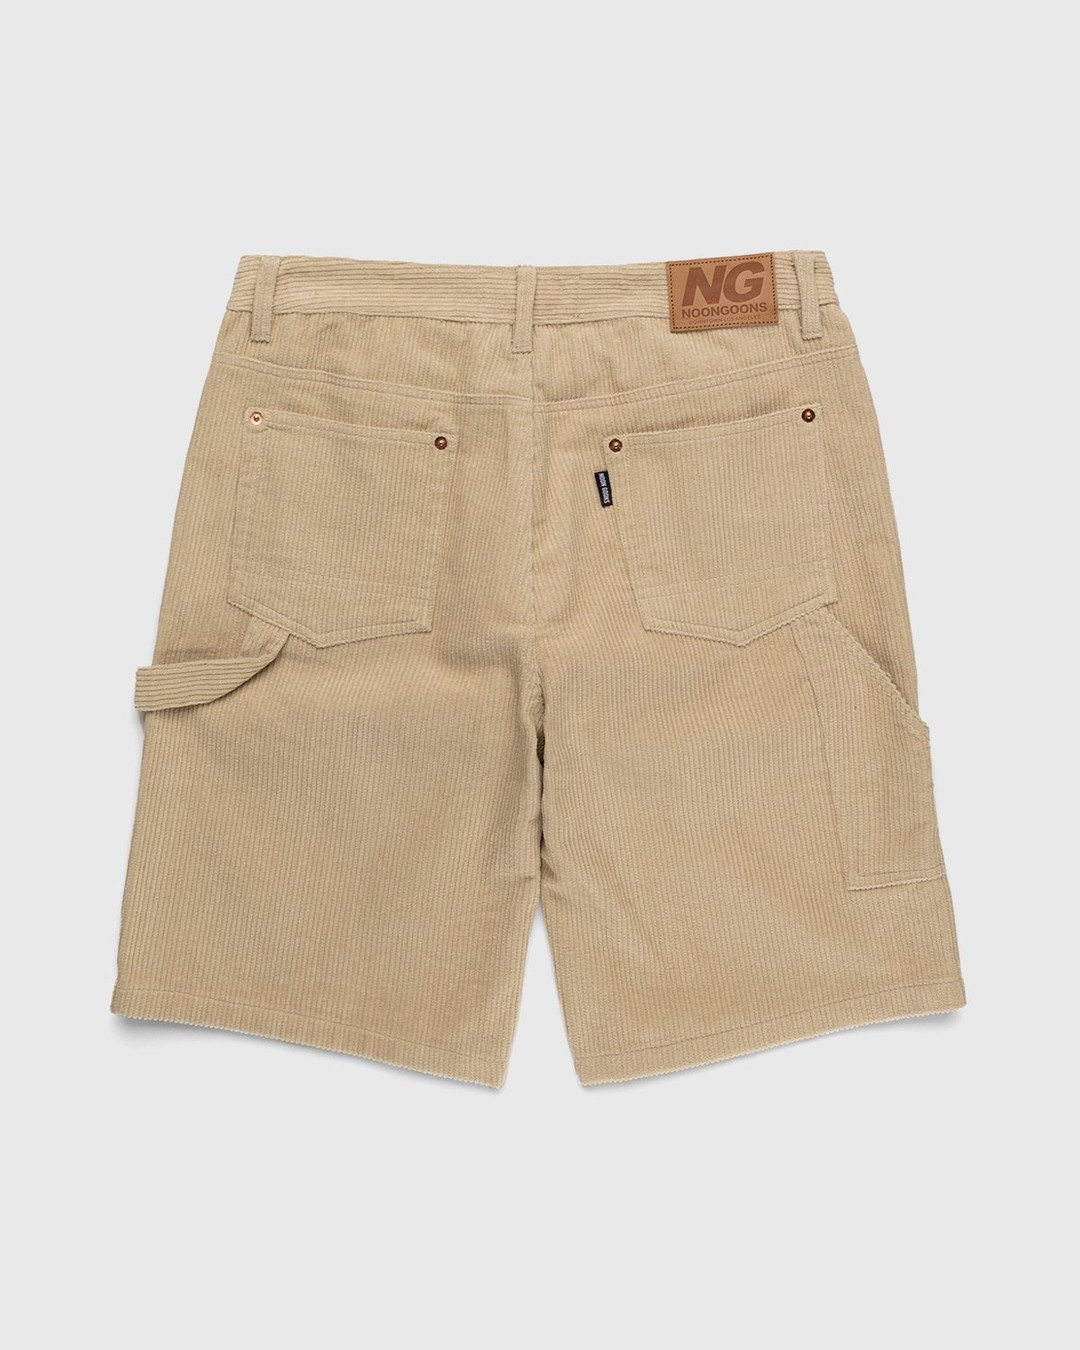 Noon Goons – Sublime Cord Short Overcast - Shorts - Beige - Image 2